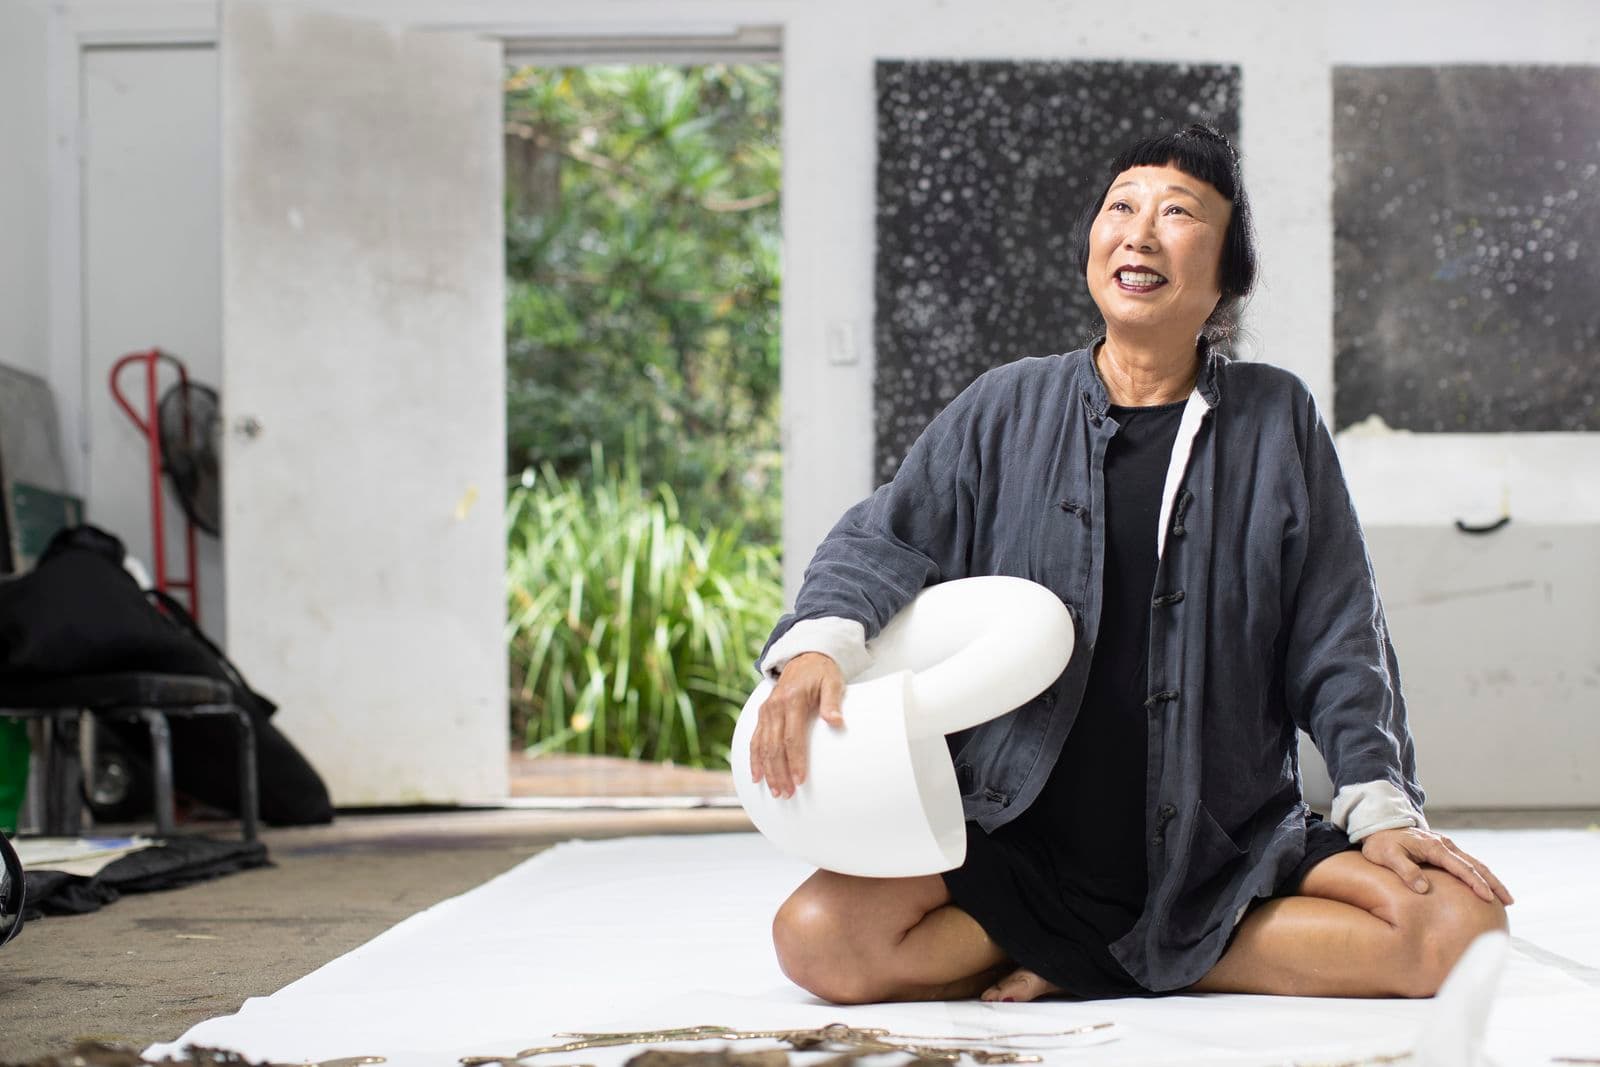 Woman artist sitting on her studio floor holding a sculpture maquette